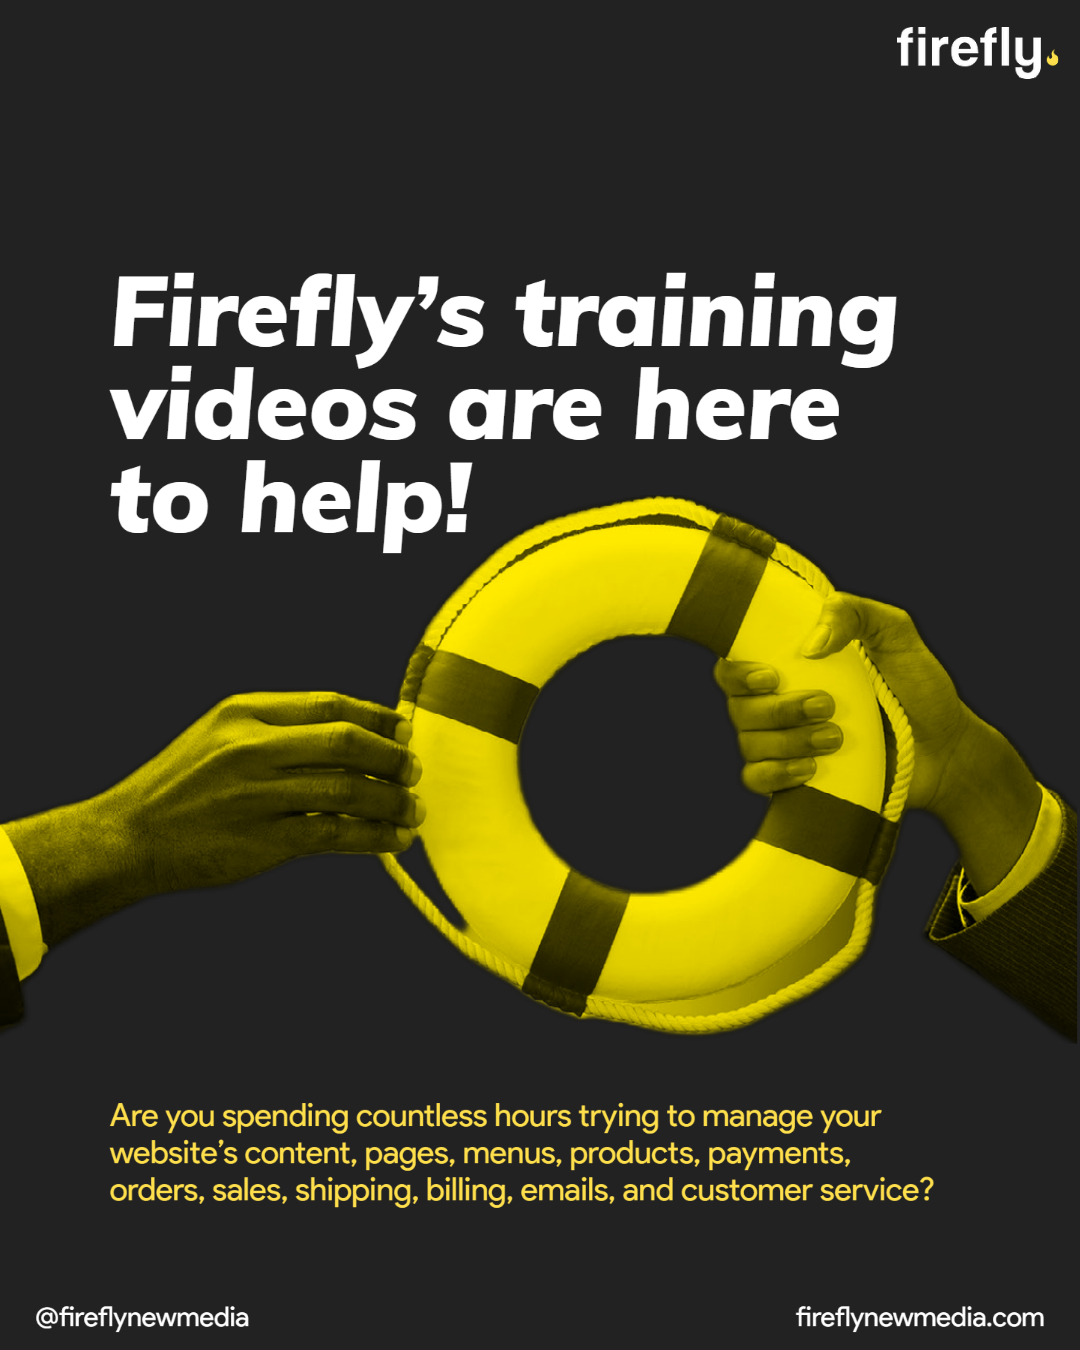 Effortlessly Manage Your Website with Firefly's Training Videos, Custom Training Videos to Manage your Website